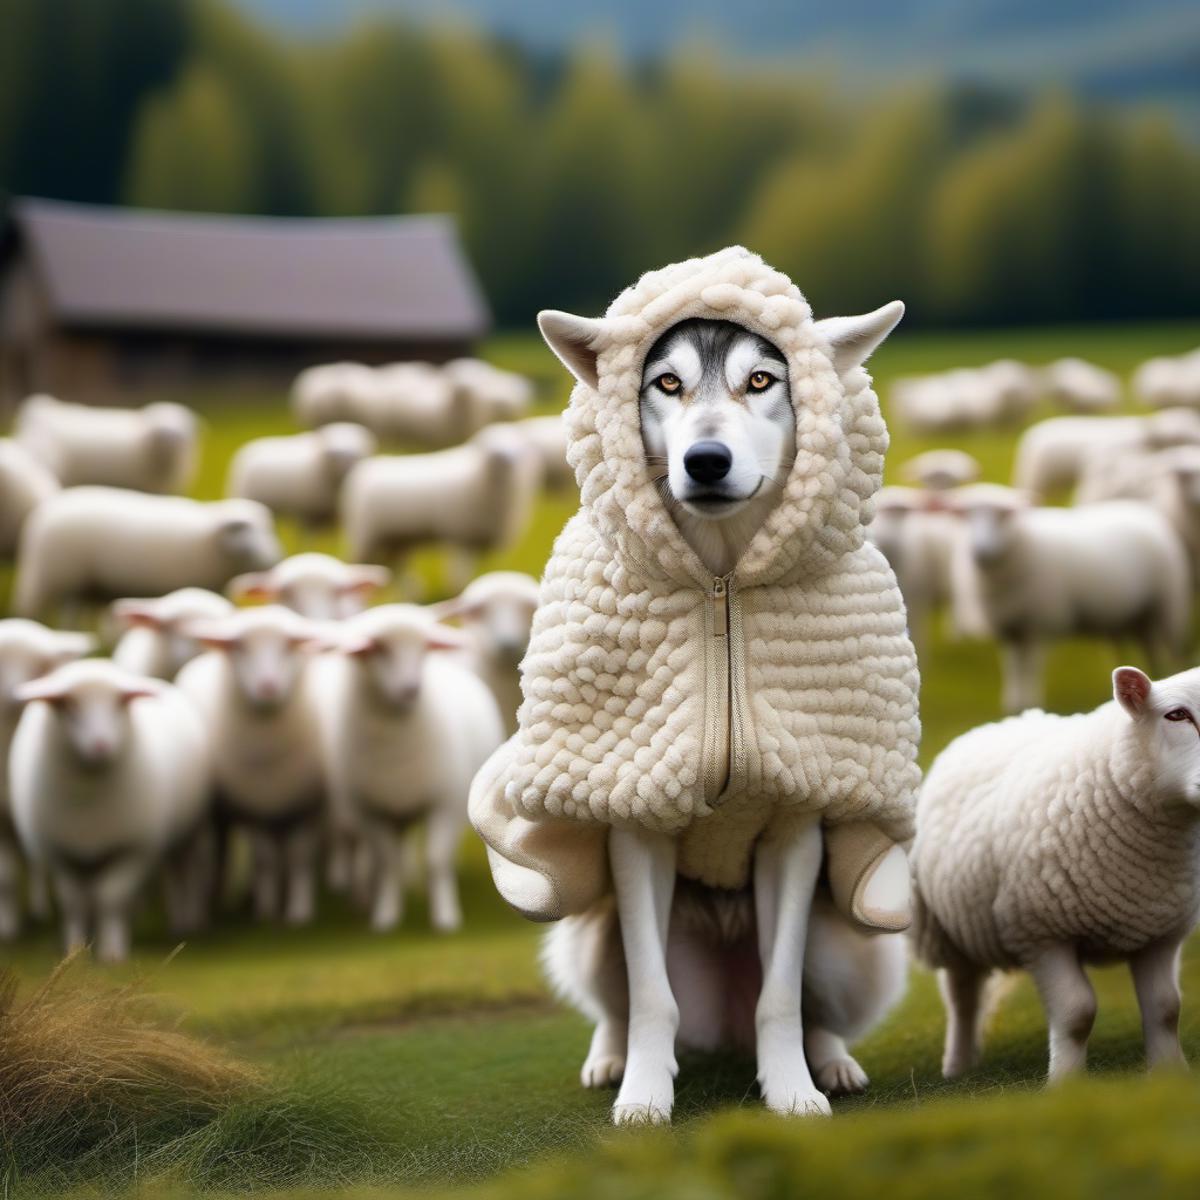 A dog wearing a white coat and hat, surrounded by a herd of sheep.